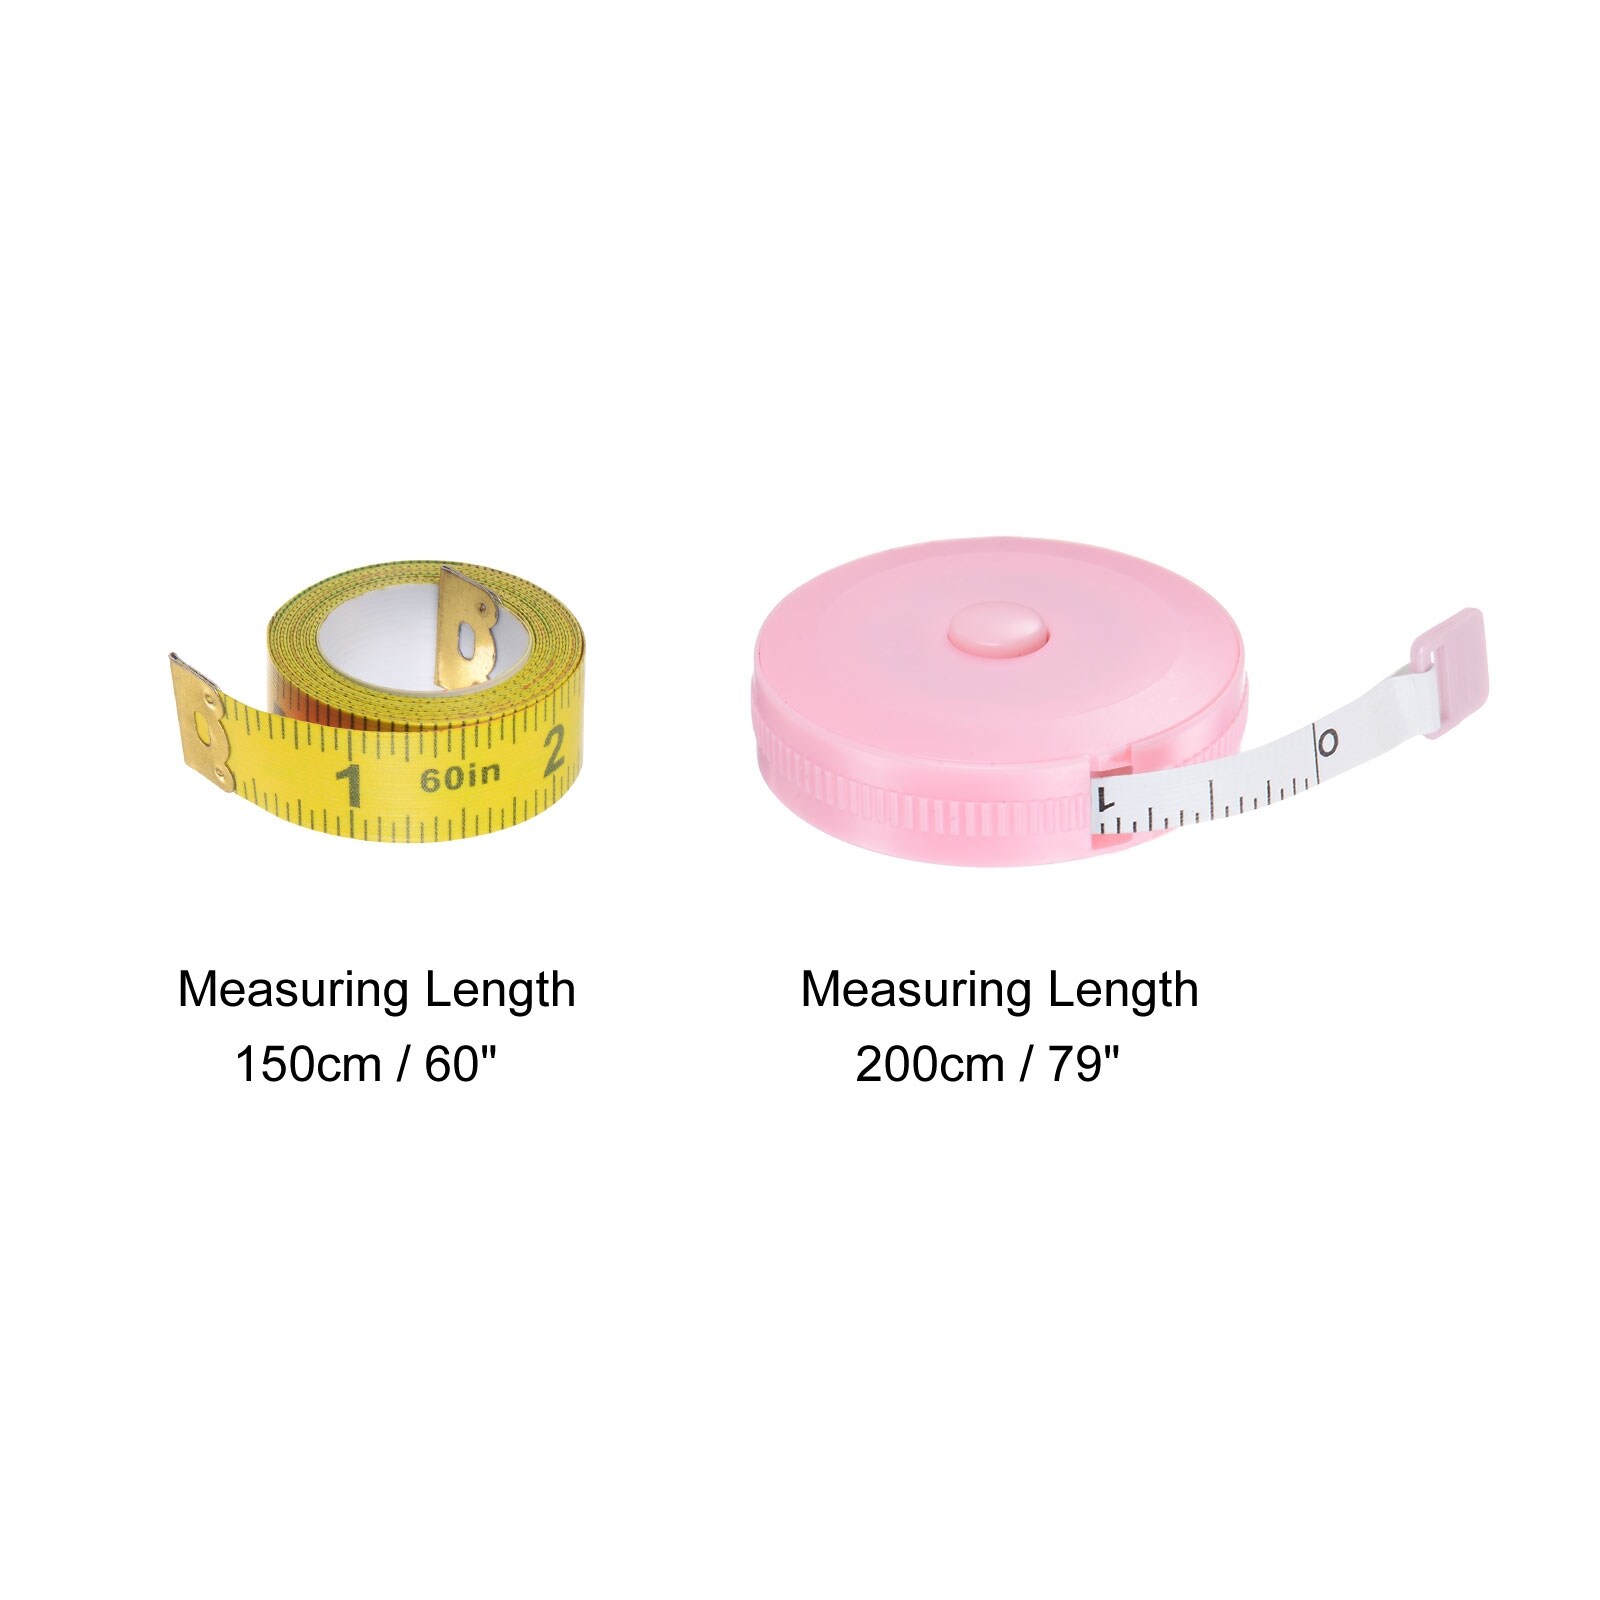 Pink Centimeter Tape Measure On Blue Stock Photo 1871371009